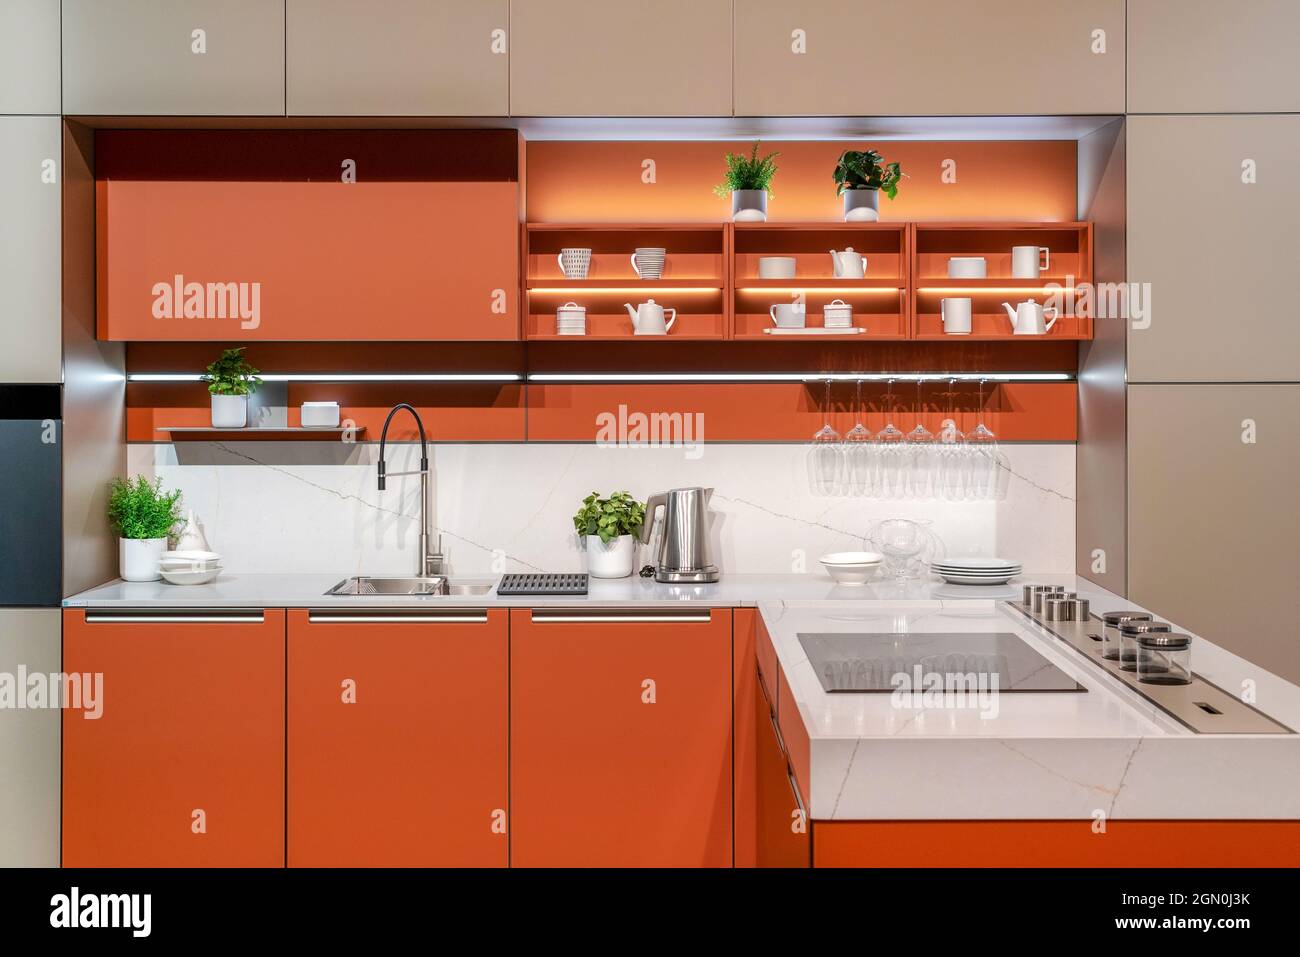 Contemporary interior of kitchen appliances and cupboards designed in minimal style in orange color Stock Photo